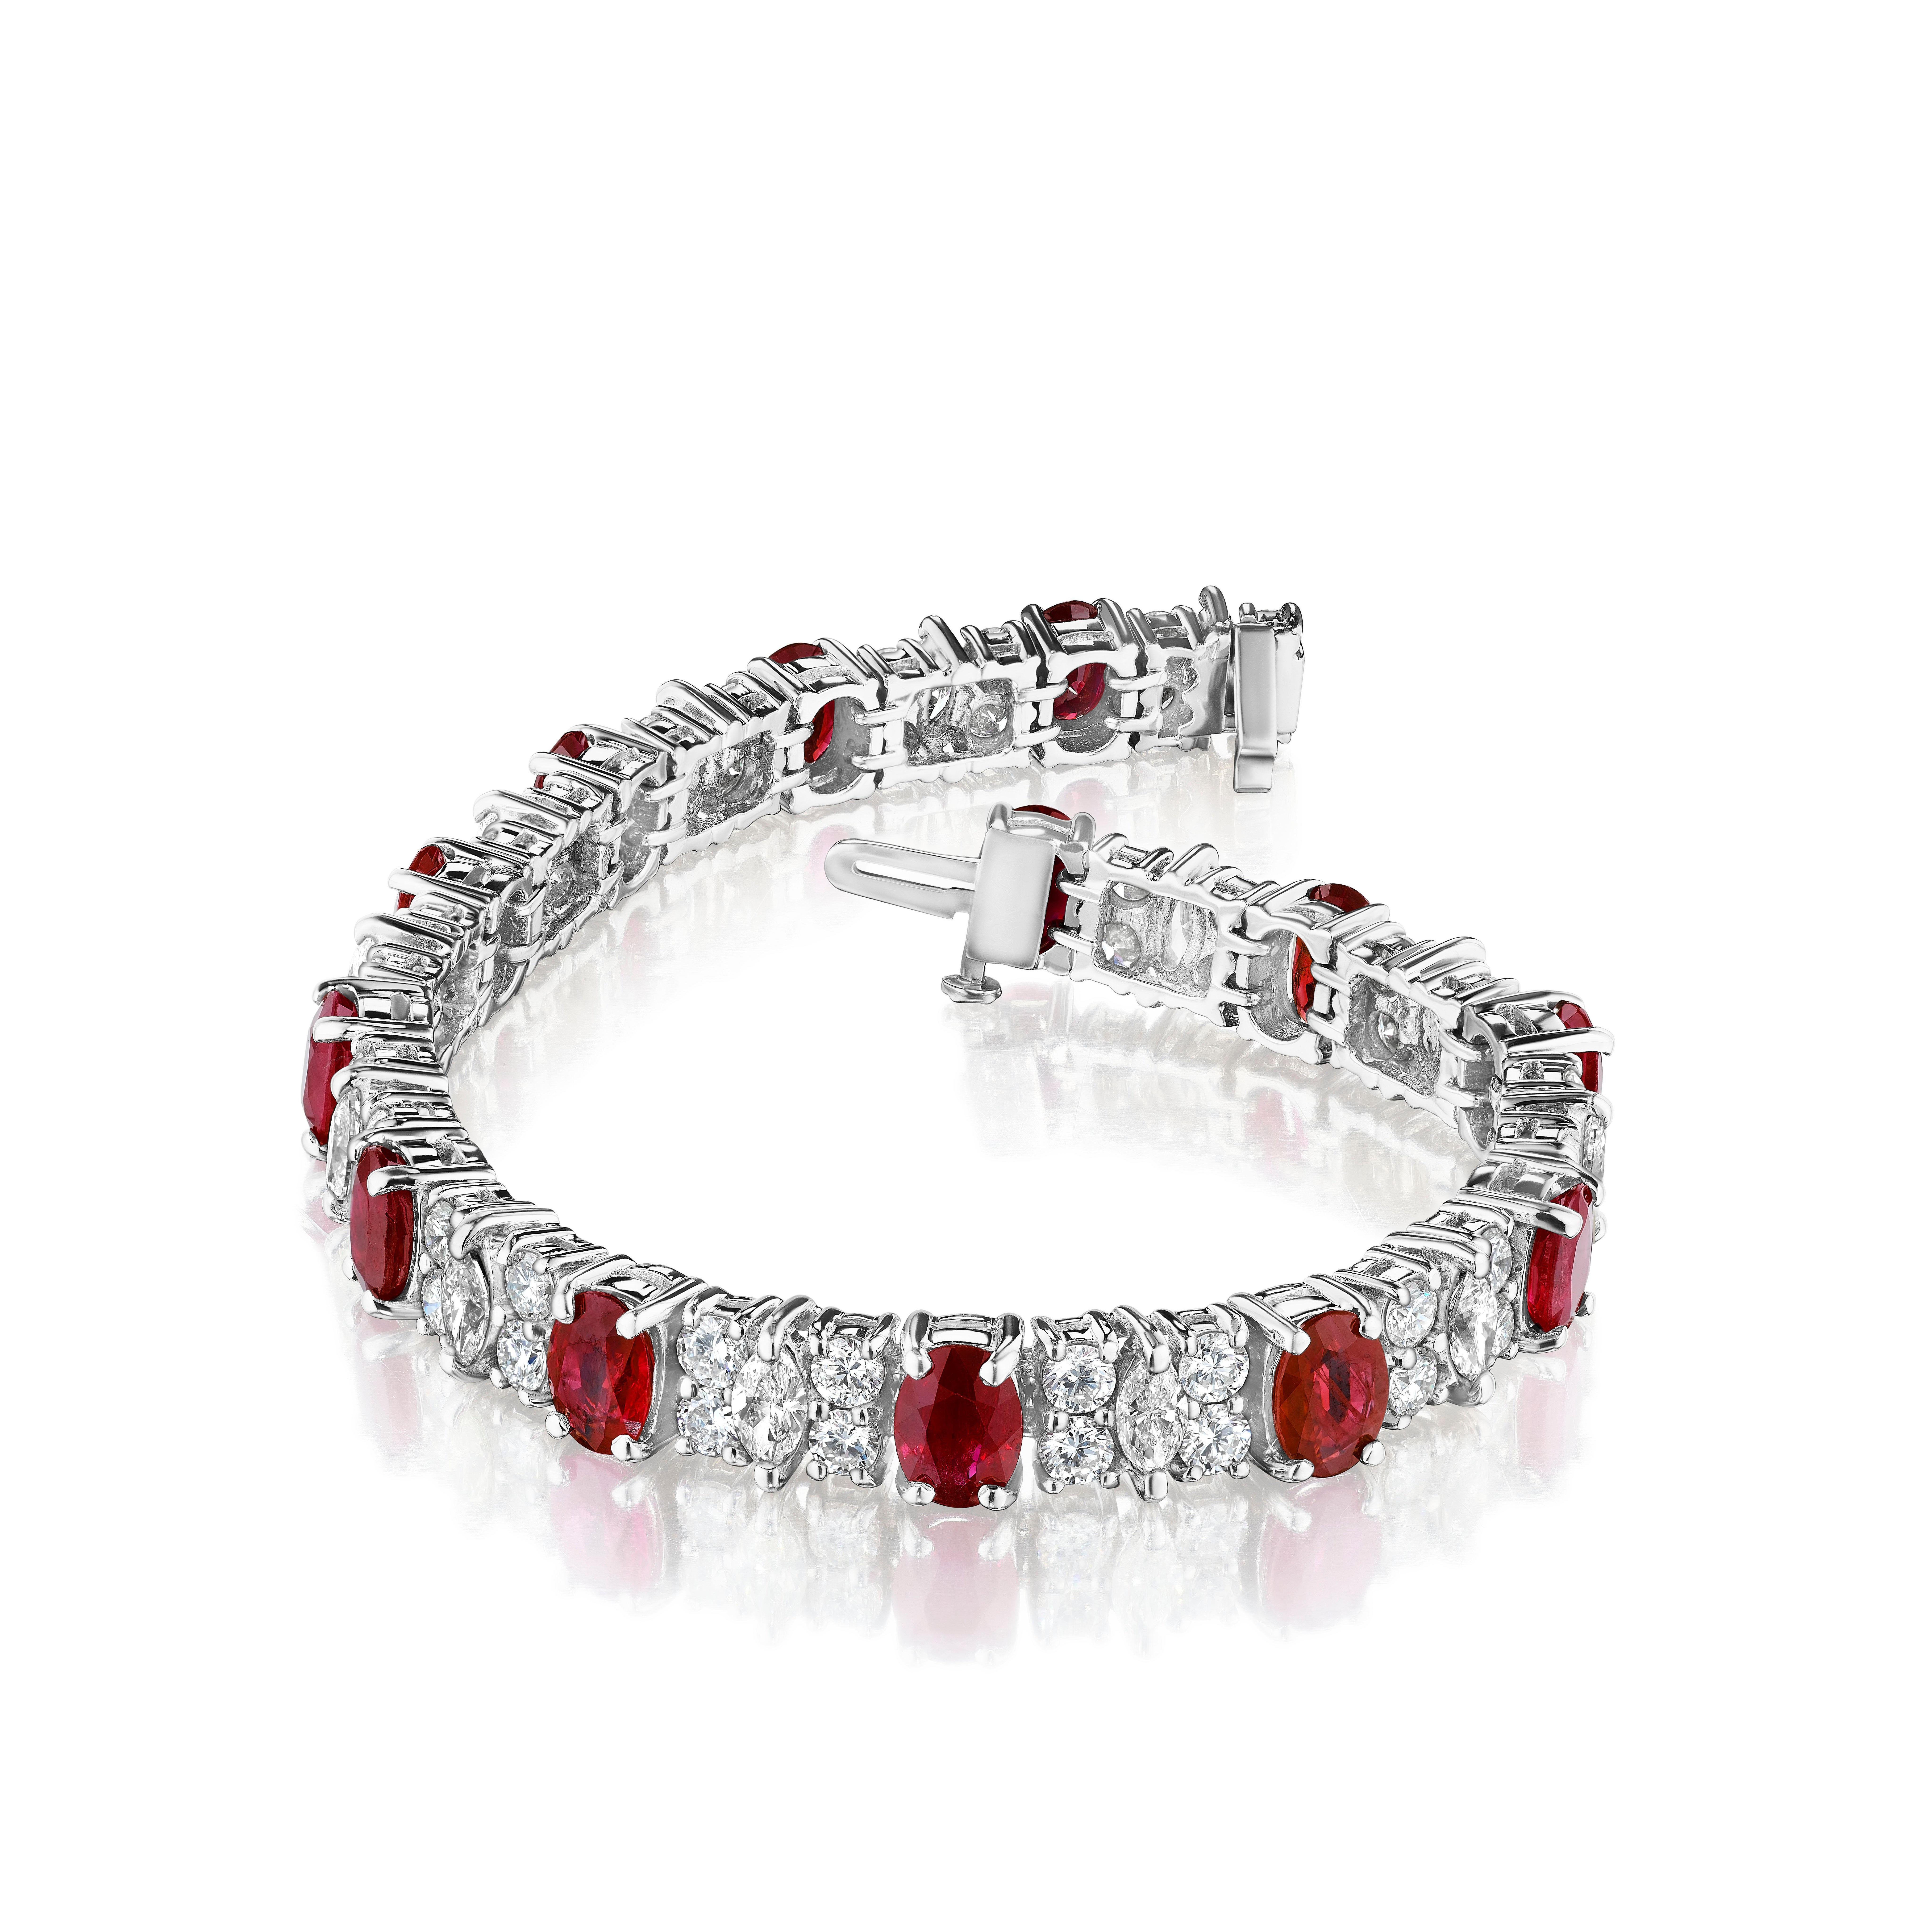 Oval Cut 19.61ct Oval Ruby & Marquise Cut Diamond Bracelet in 18KT White Gold For Sale